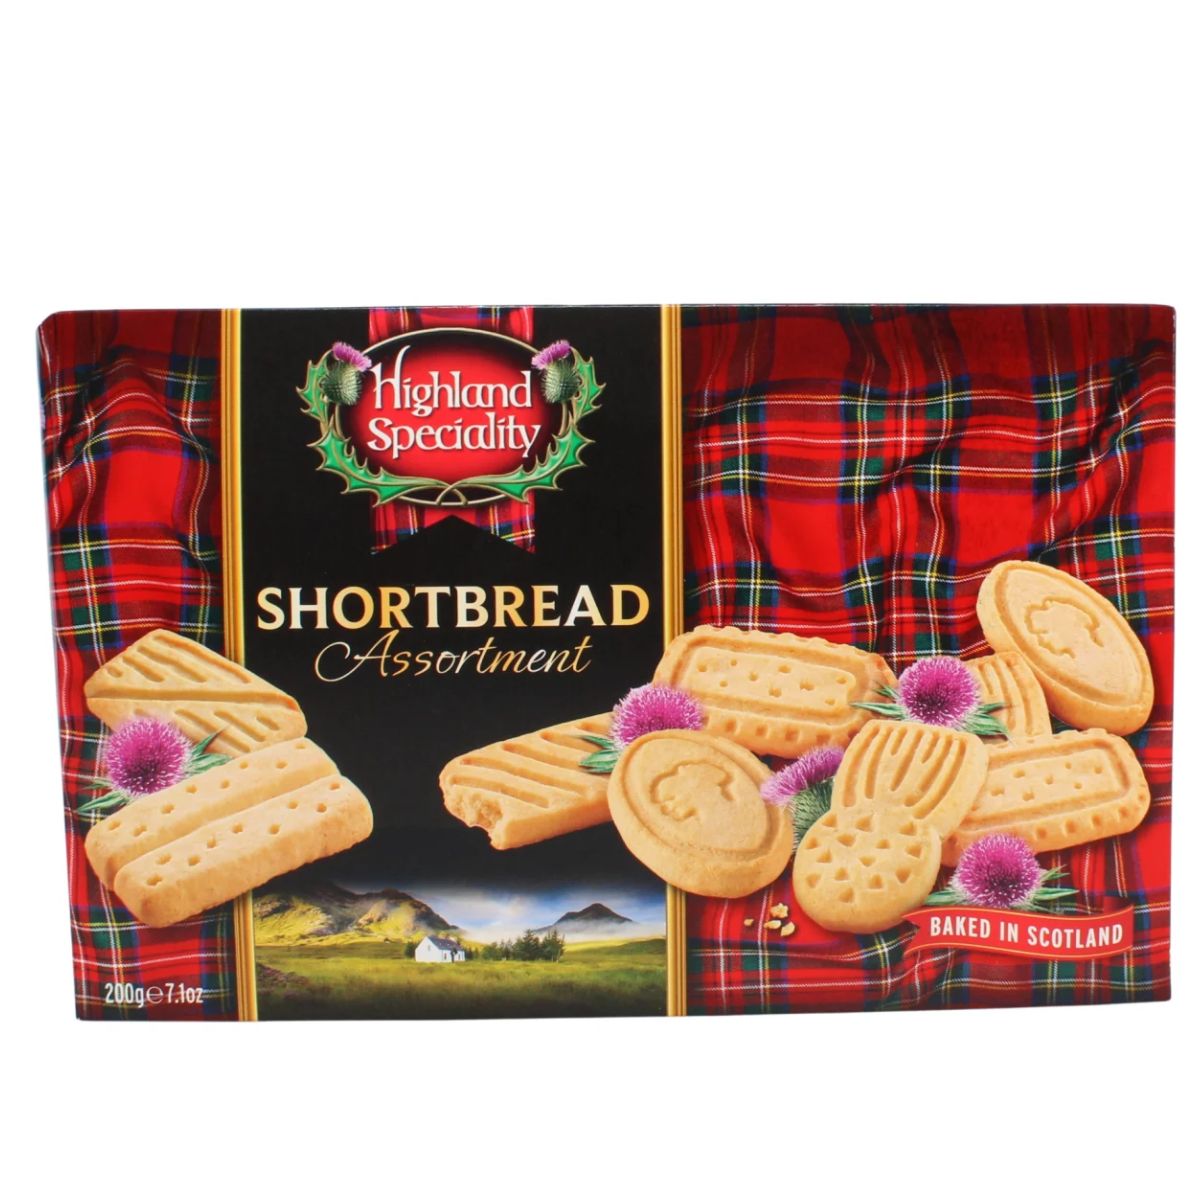 A box of Highland - Speciality Shortbread Assortment - 200g with tartan on it.